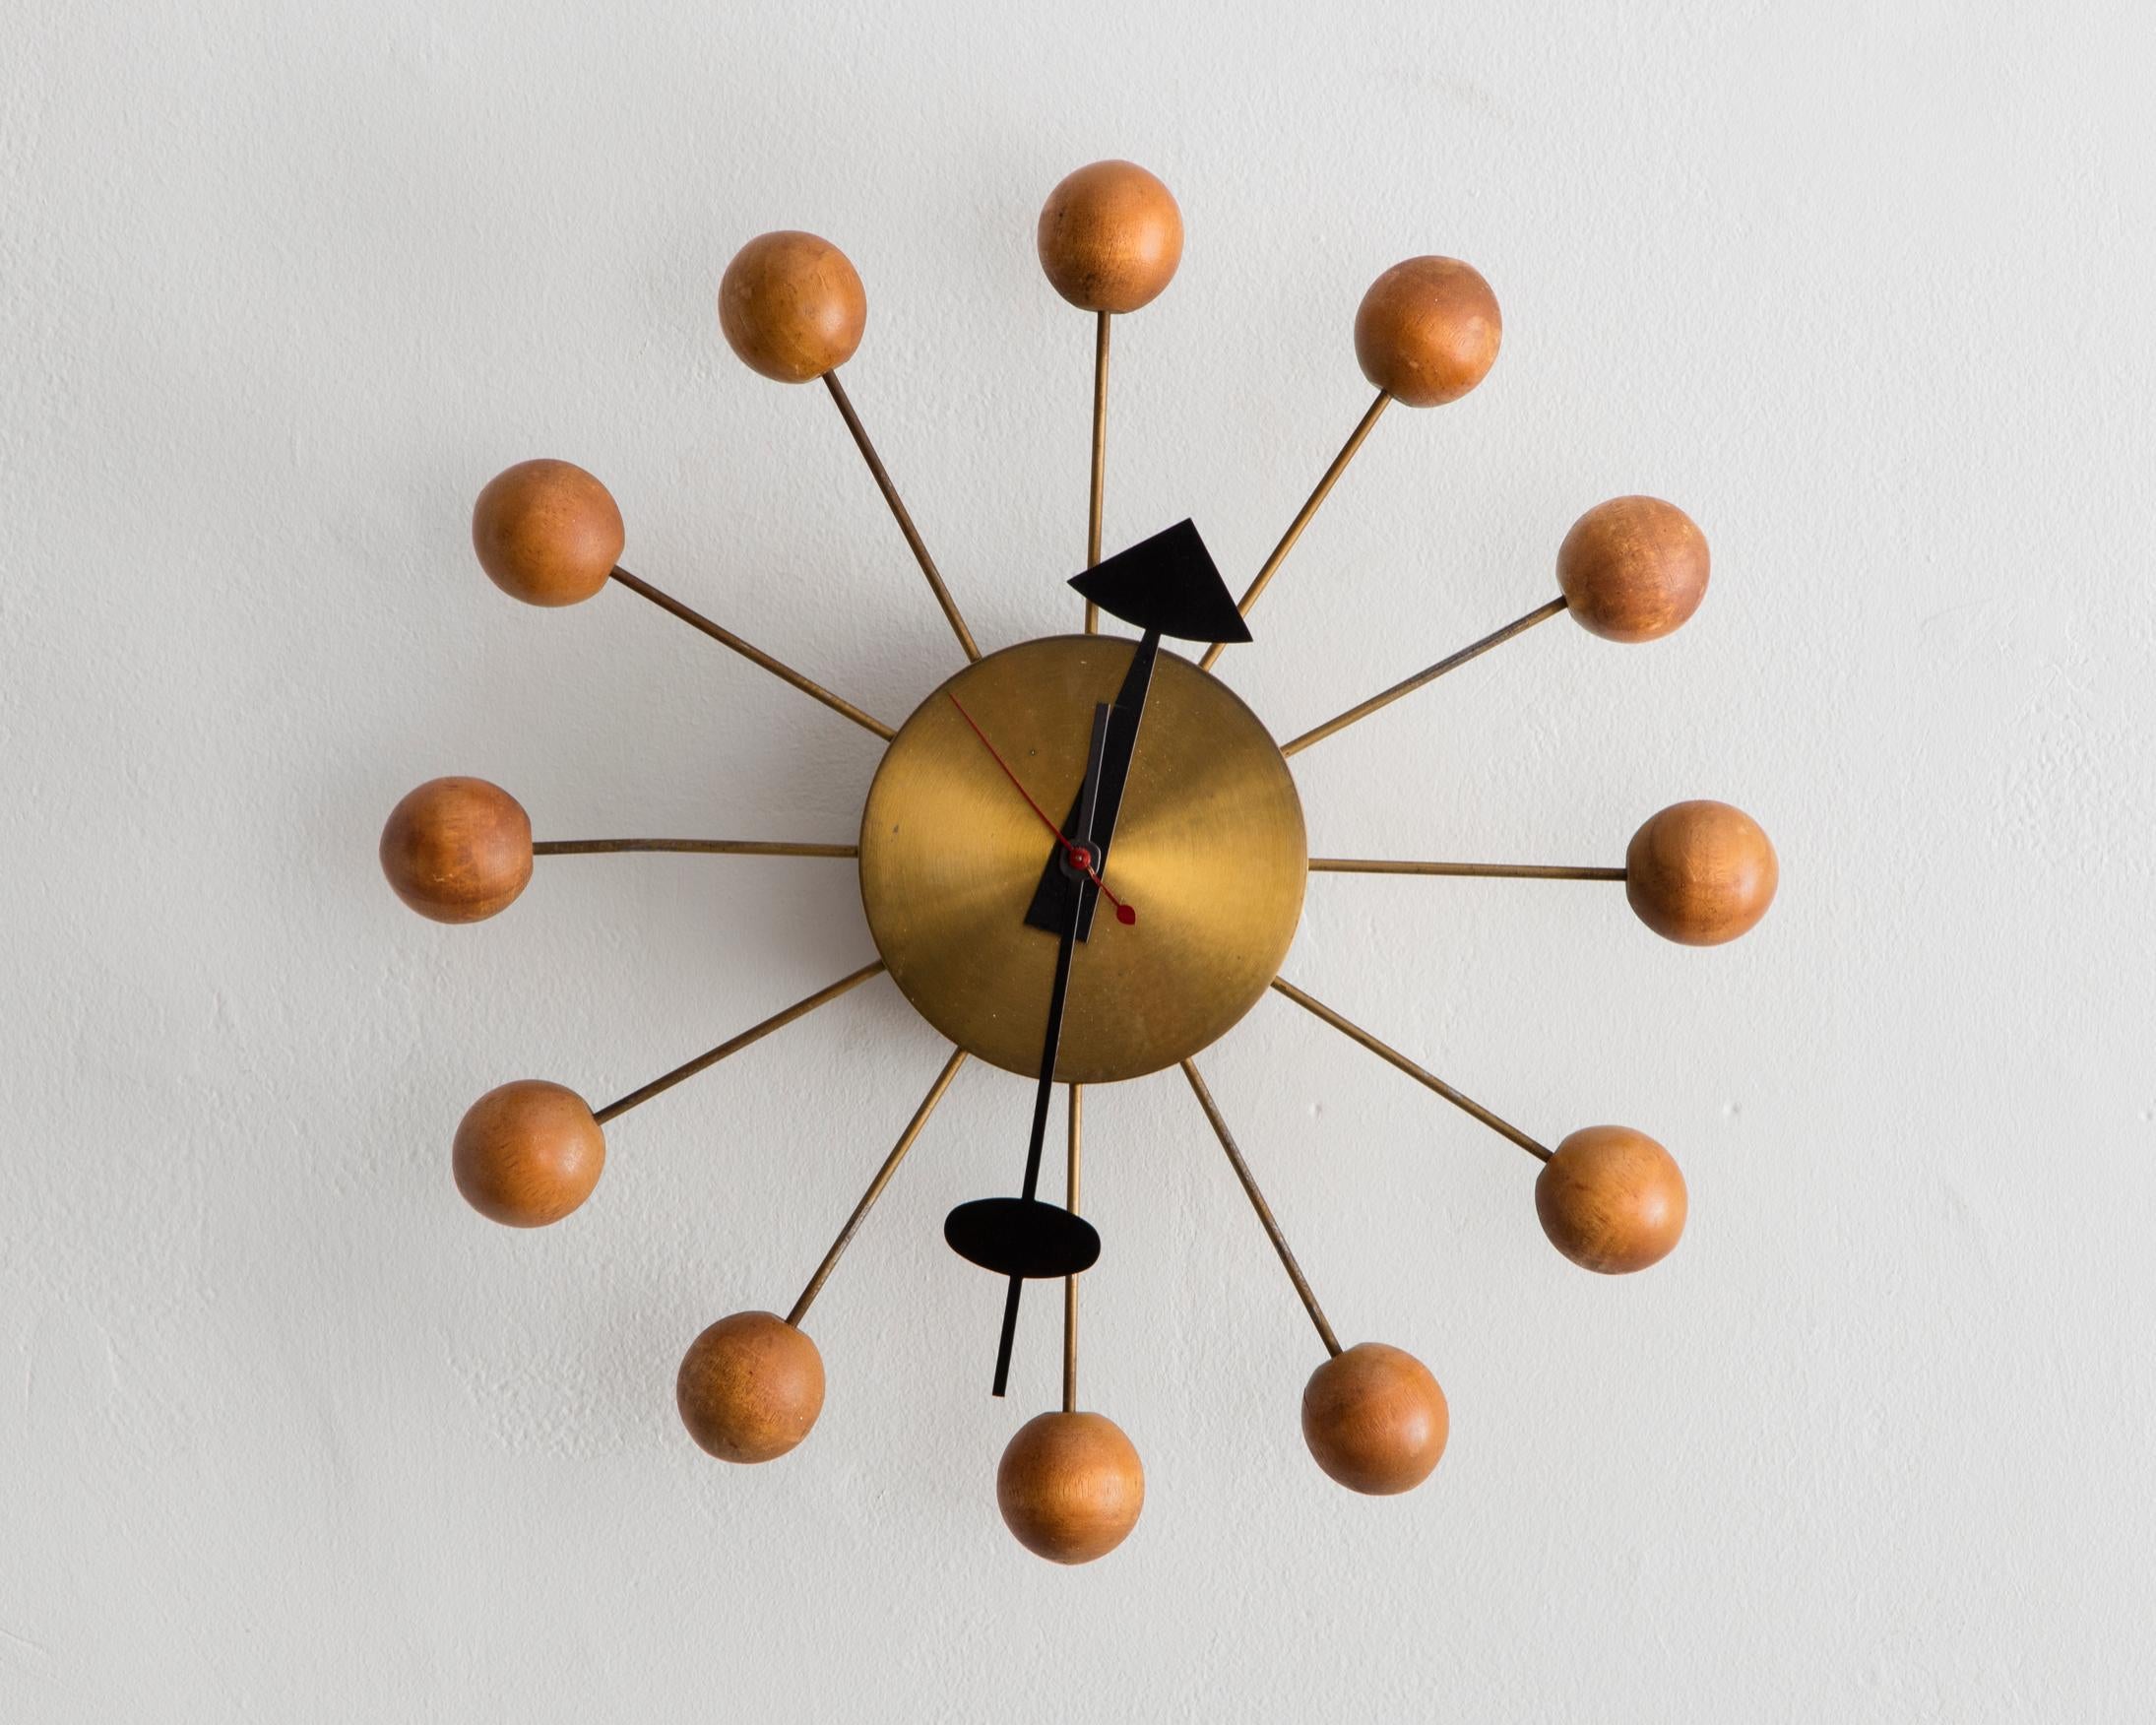 Ball wall clock, model no. 4755. Designed 1947, this example produced 1948-50. Manufactured by Howard Miller Clock Company, Zeeland, MI. Brass, steel, maple. The ball clock was included in An Exhibition for Modern Living at the Detroit Institute of